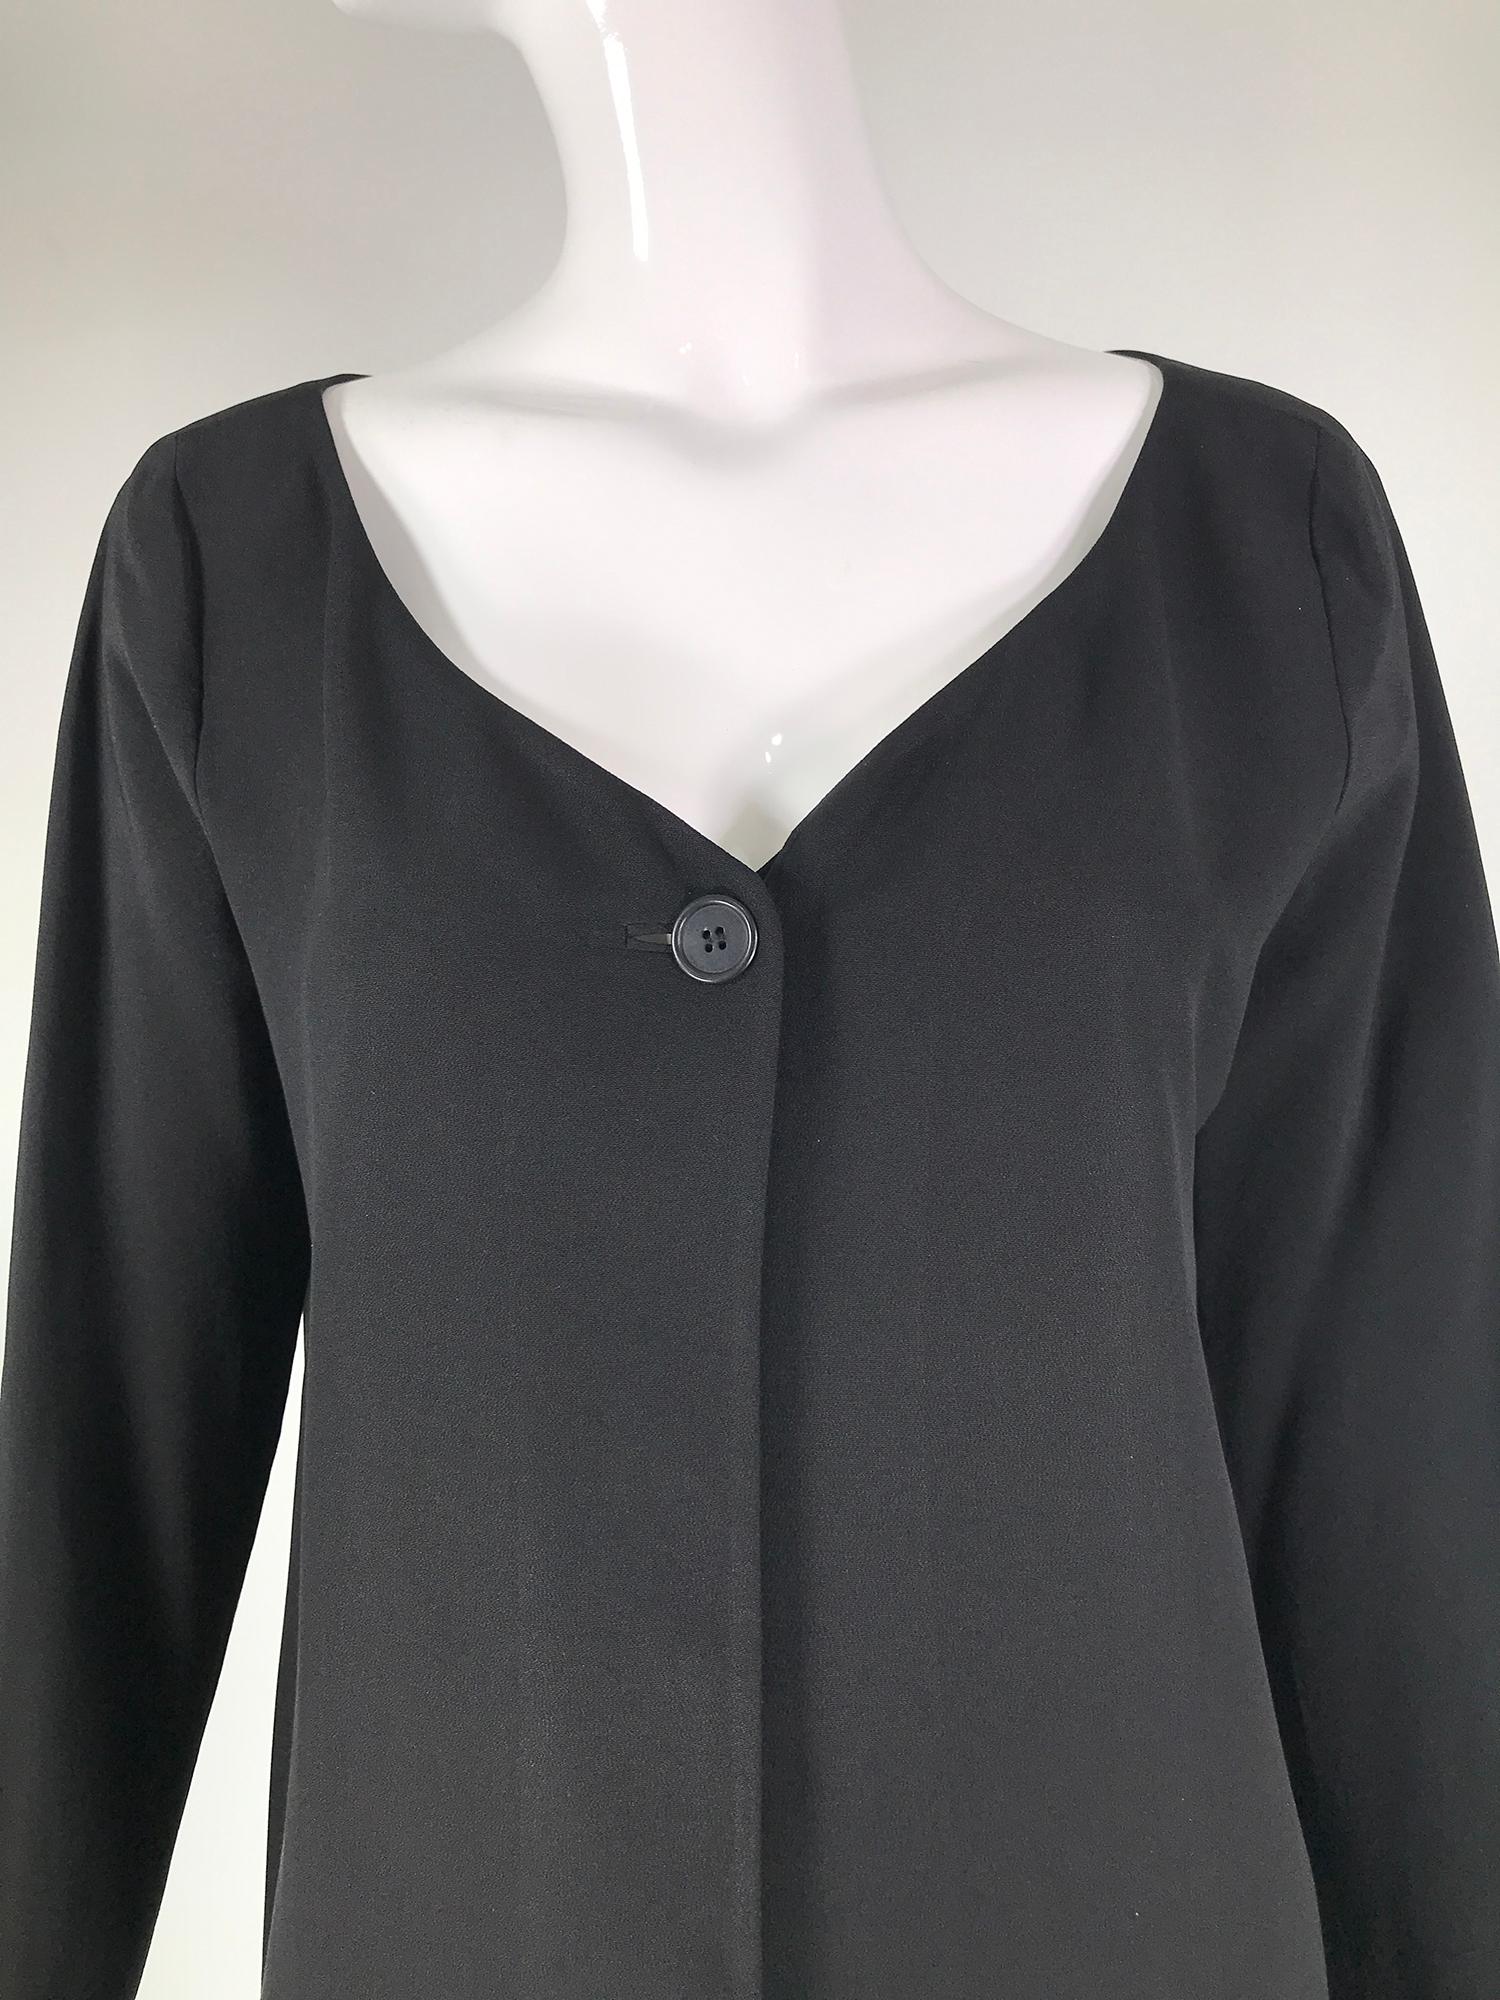 Donna Karan black silk crepe, open front jacket with pockets 1980s. V neckline,  long sleeve, princess seam jacket closes with a single button at the neck top, the jacket is below hip length, with hip front besom pockets. The jacket is lined in